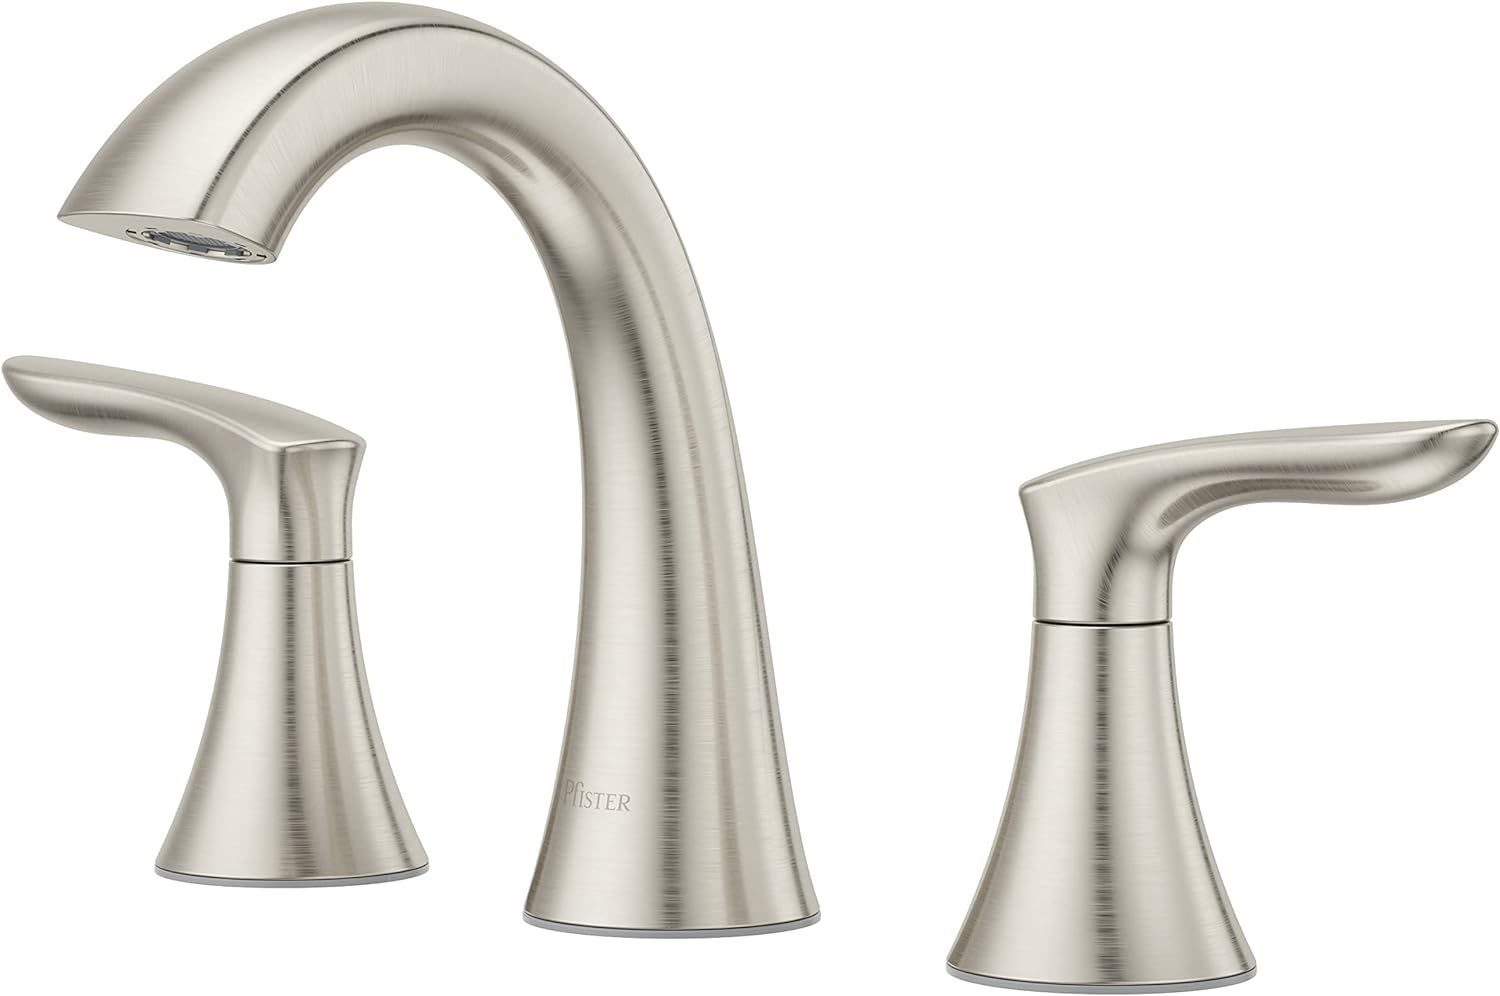 Primary image for Widespread Bathroom Faucet In Brushed Nickel By Pfister Weller Lg49Wr0K.